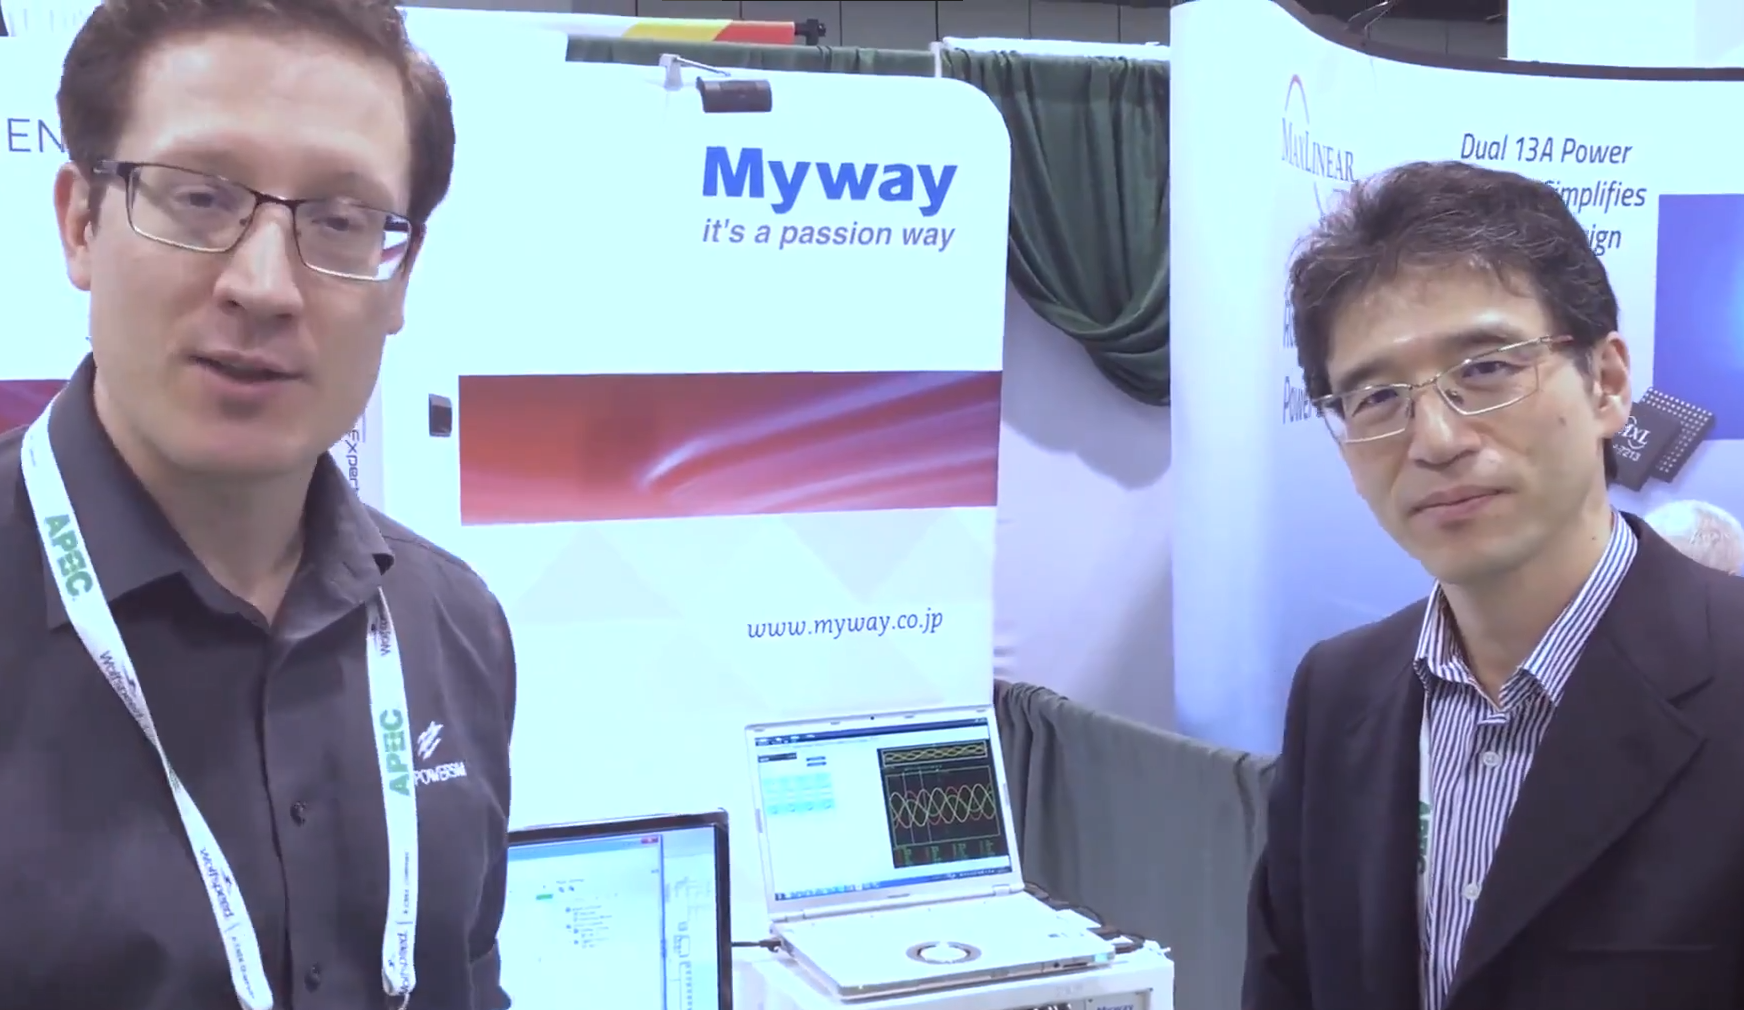 Two people standing in front of the Myway banner.